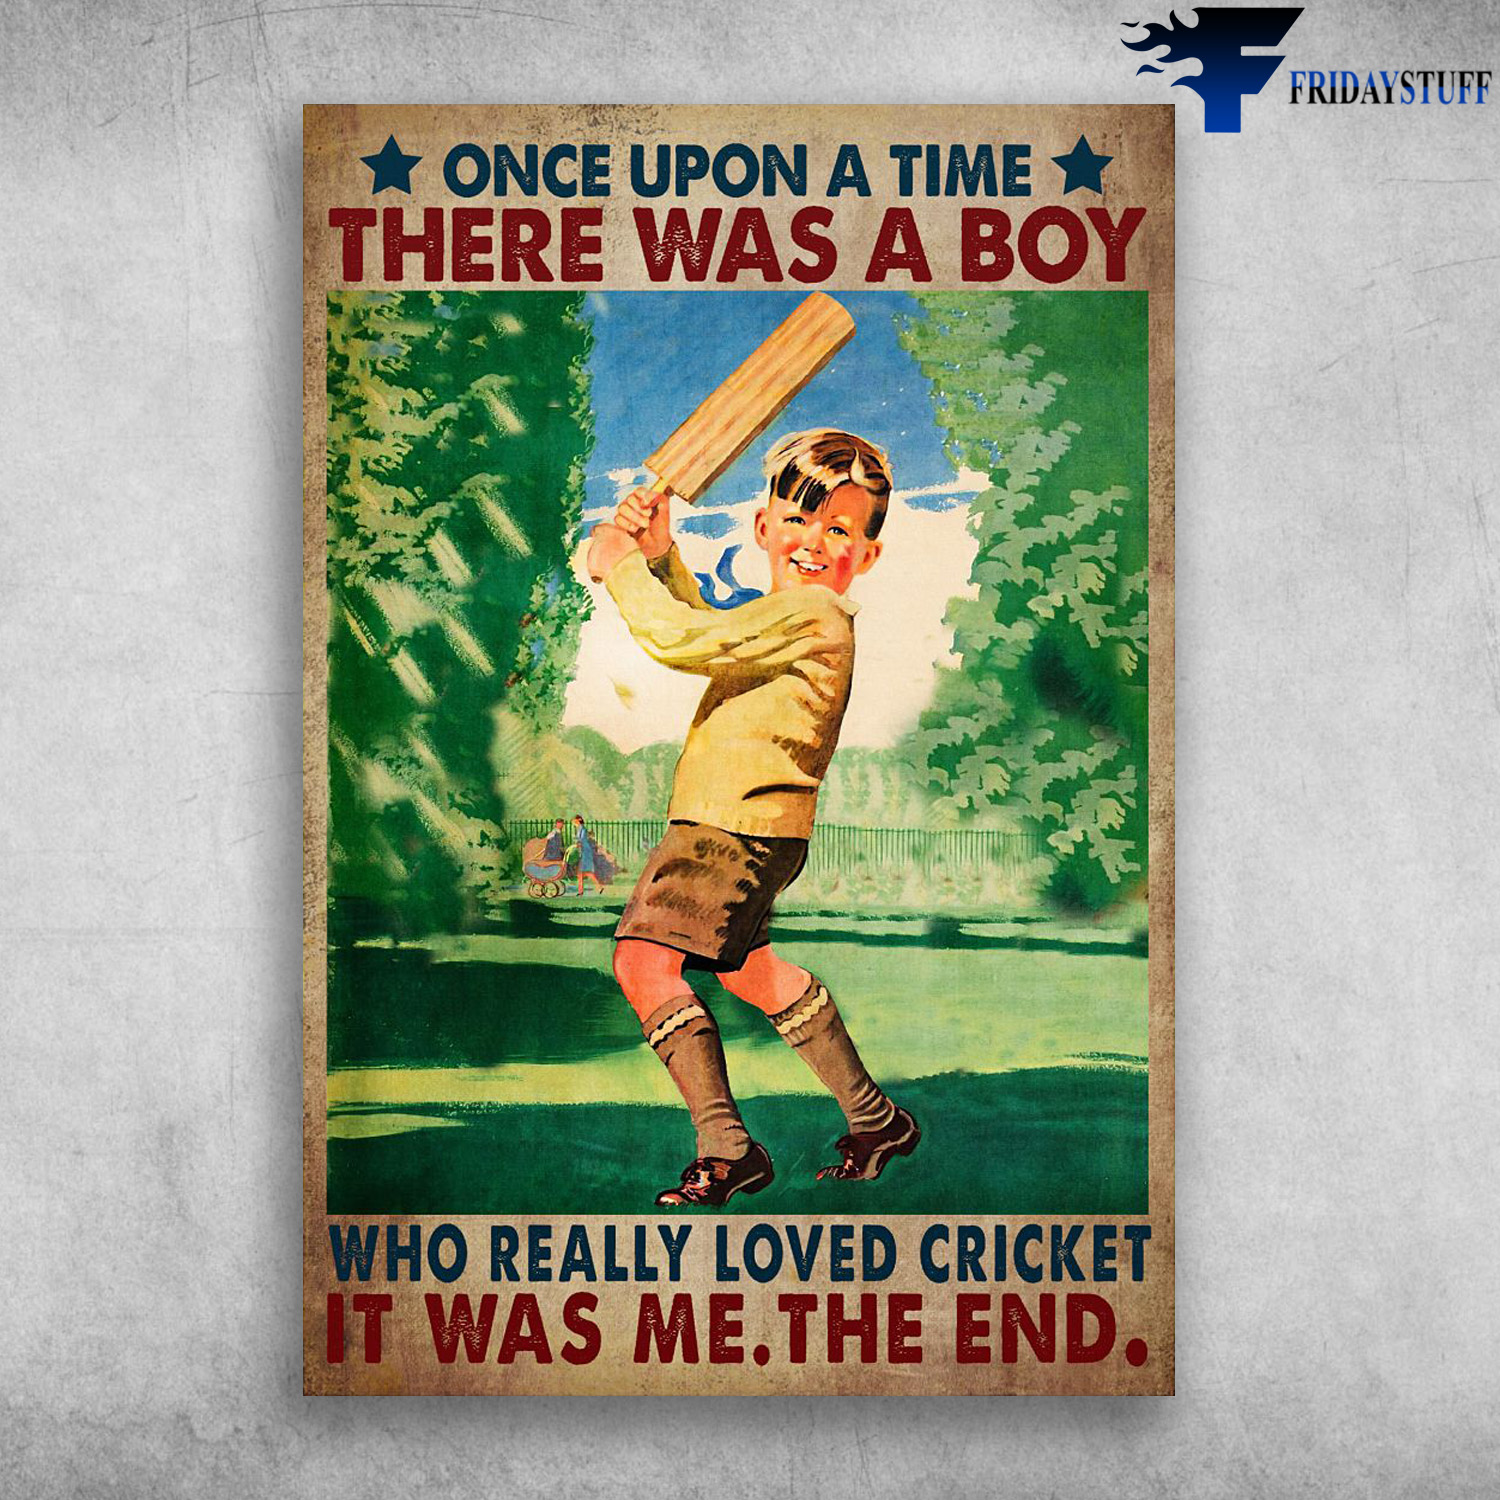 Boy Loves Cricket - Once Upon A Time, There Was A Boy, Who Really Loved Cricket, It Was Me, The End